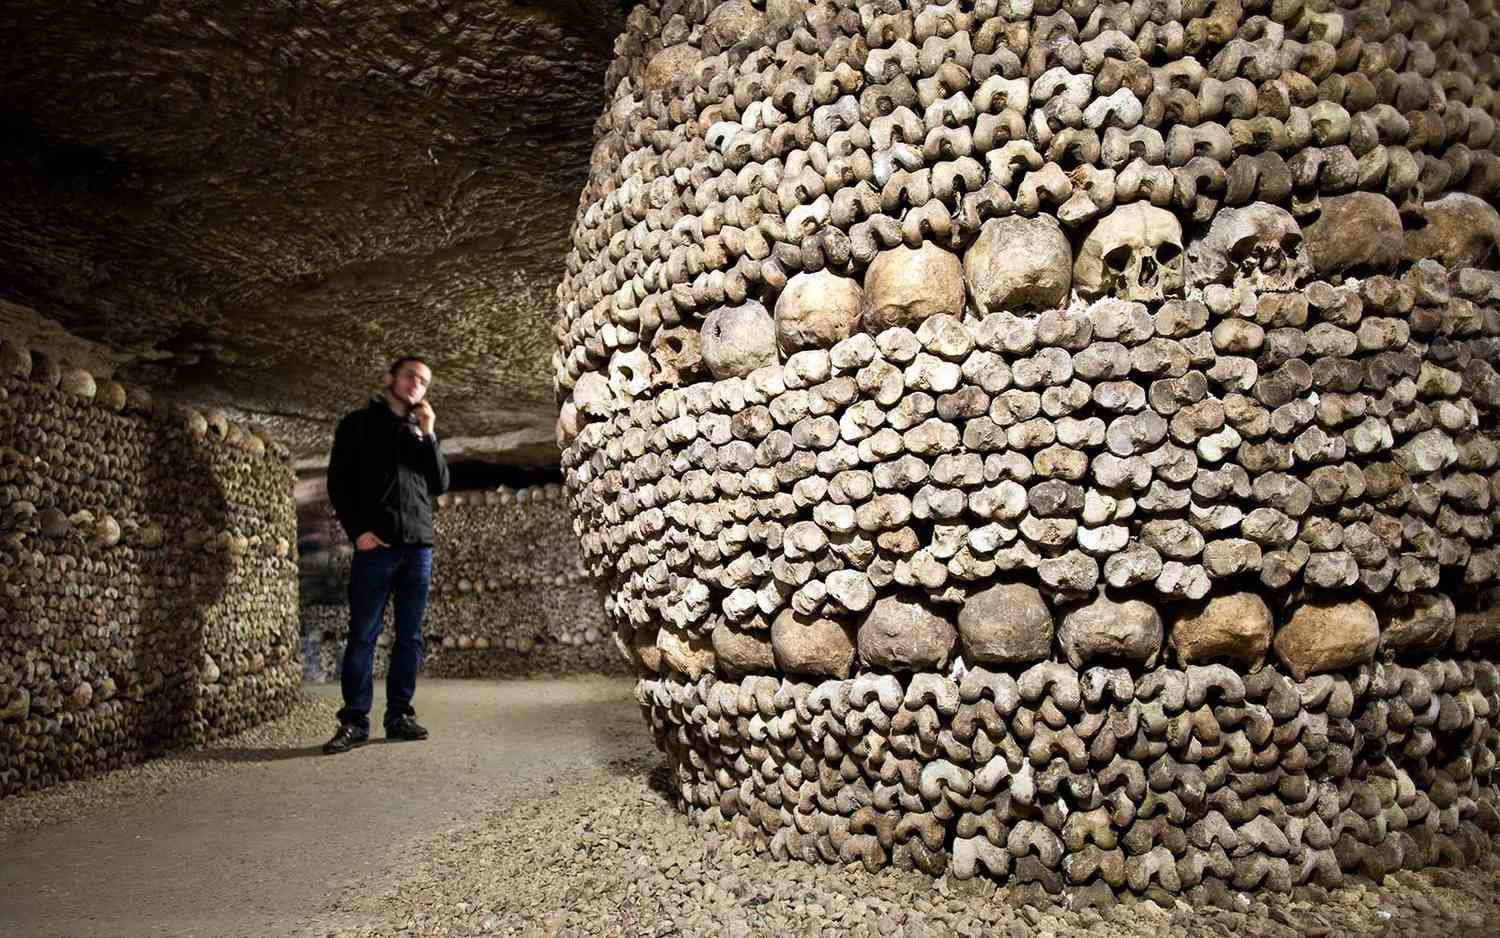 Champignons de Paris (aka Button Mushrooms) were cultivated in the catacombs under Paris (where 6 million people were buried), where it was grown on horse manure